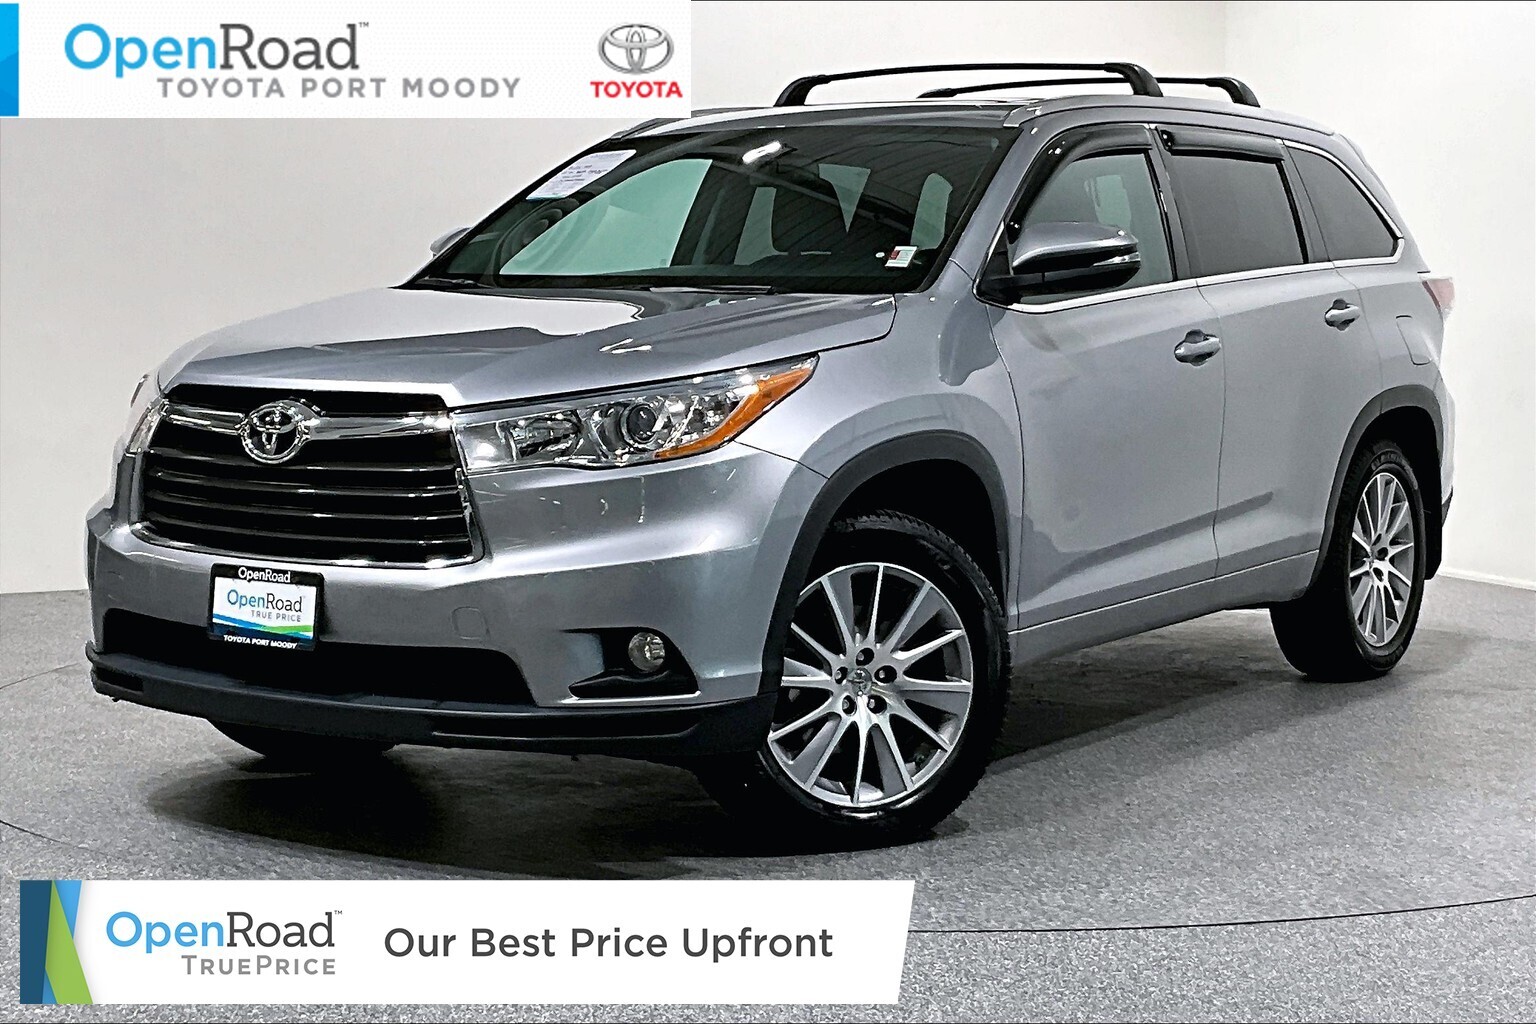 2014 Toyota Highlander XLE AWD |OpenRoad True Price |Local |One Owner |No